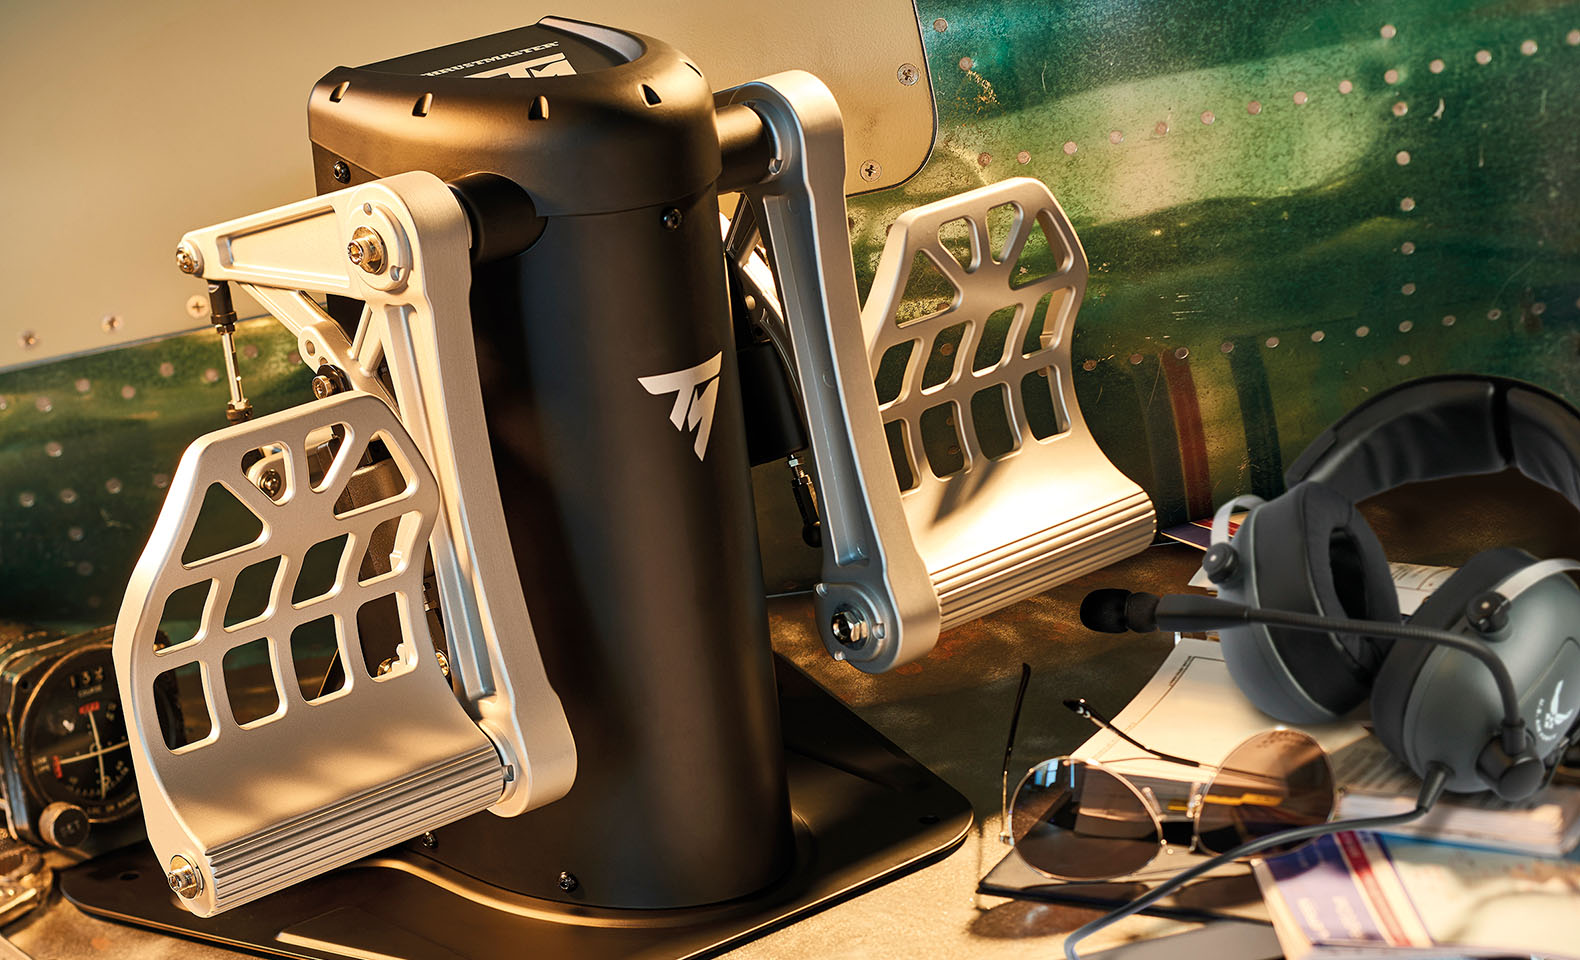 An image of the Thrustmaster TPR Rudder Pedals